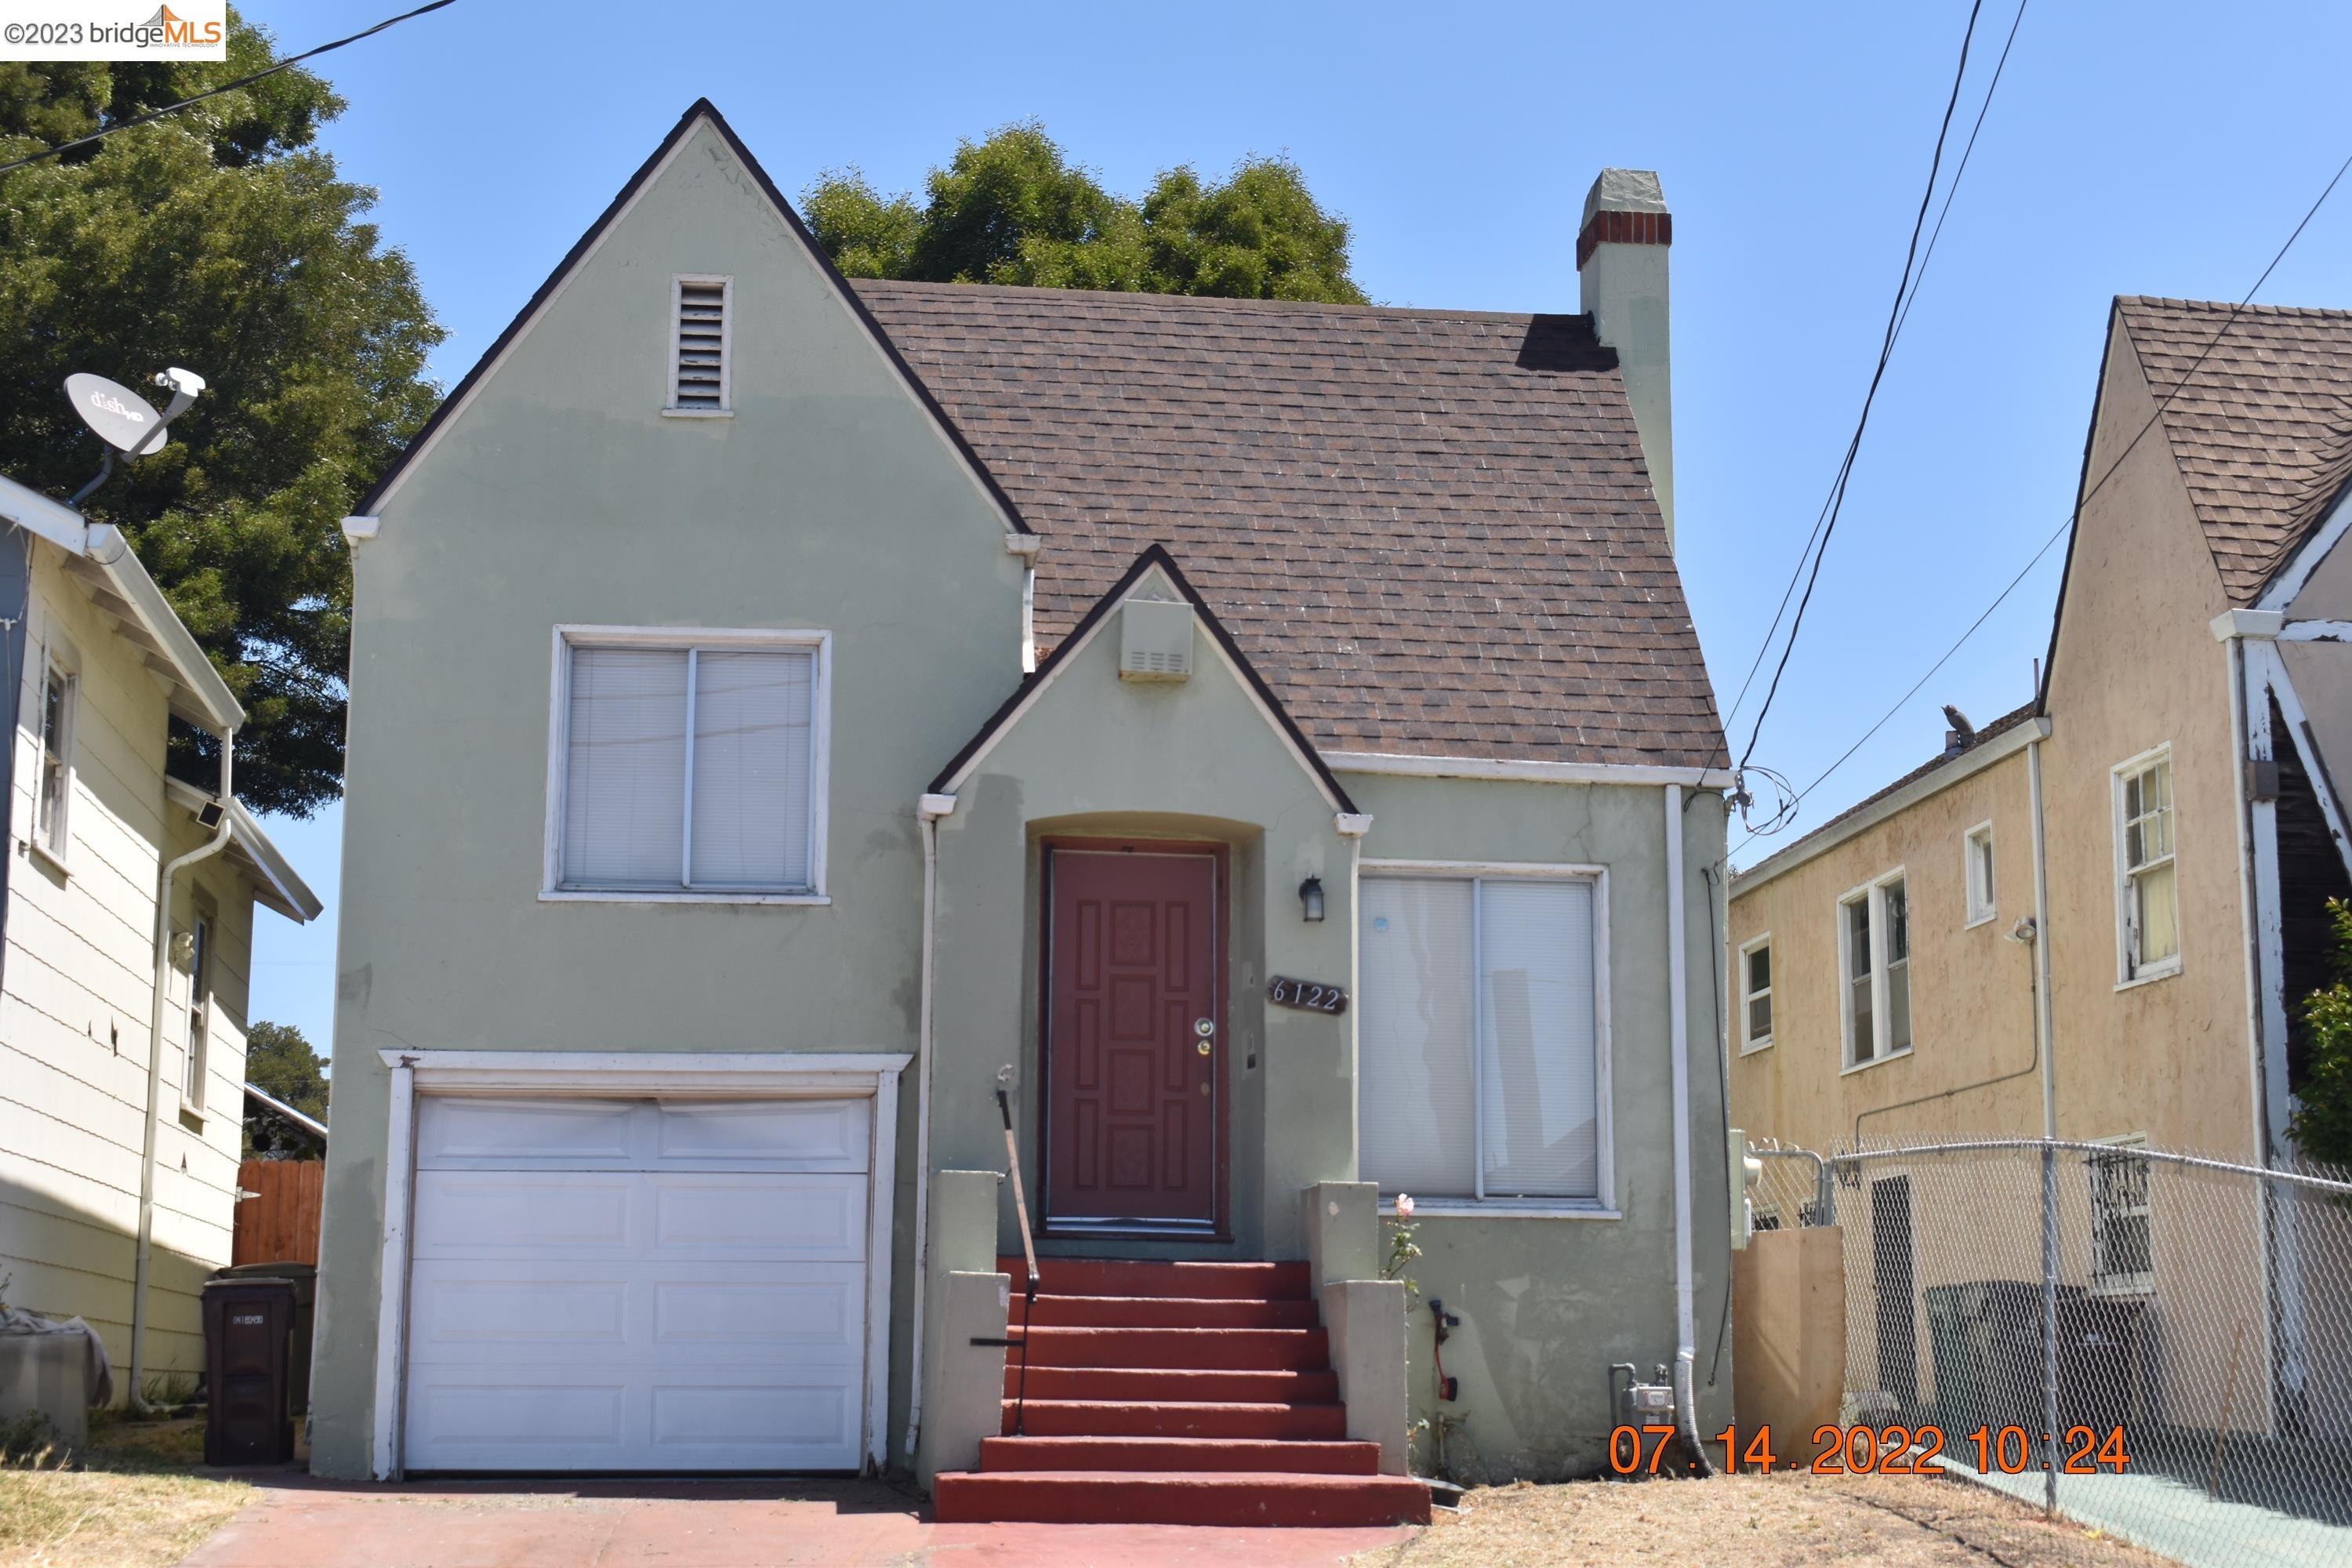 6122 Bromley Ave, Oakland, CA 94621